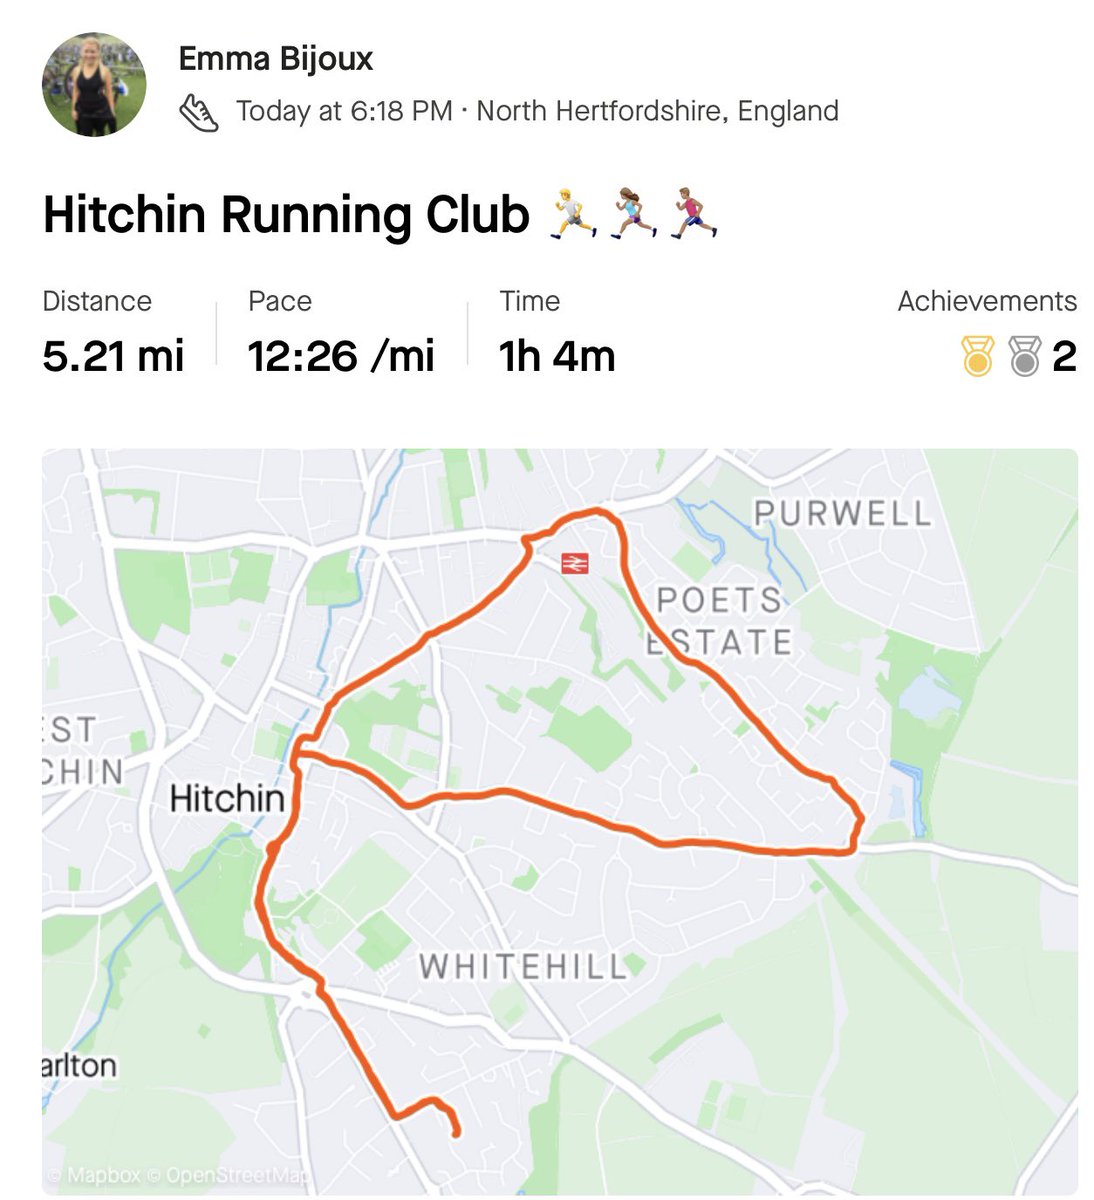 Hitchin Running Club mostly consisting of slow motion running training 🏃🏃🏽‍♀️🏃🏽‍♂️🤣 @Hitchinrunners #NHS1000Miles